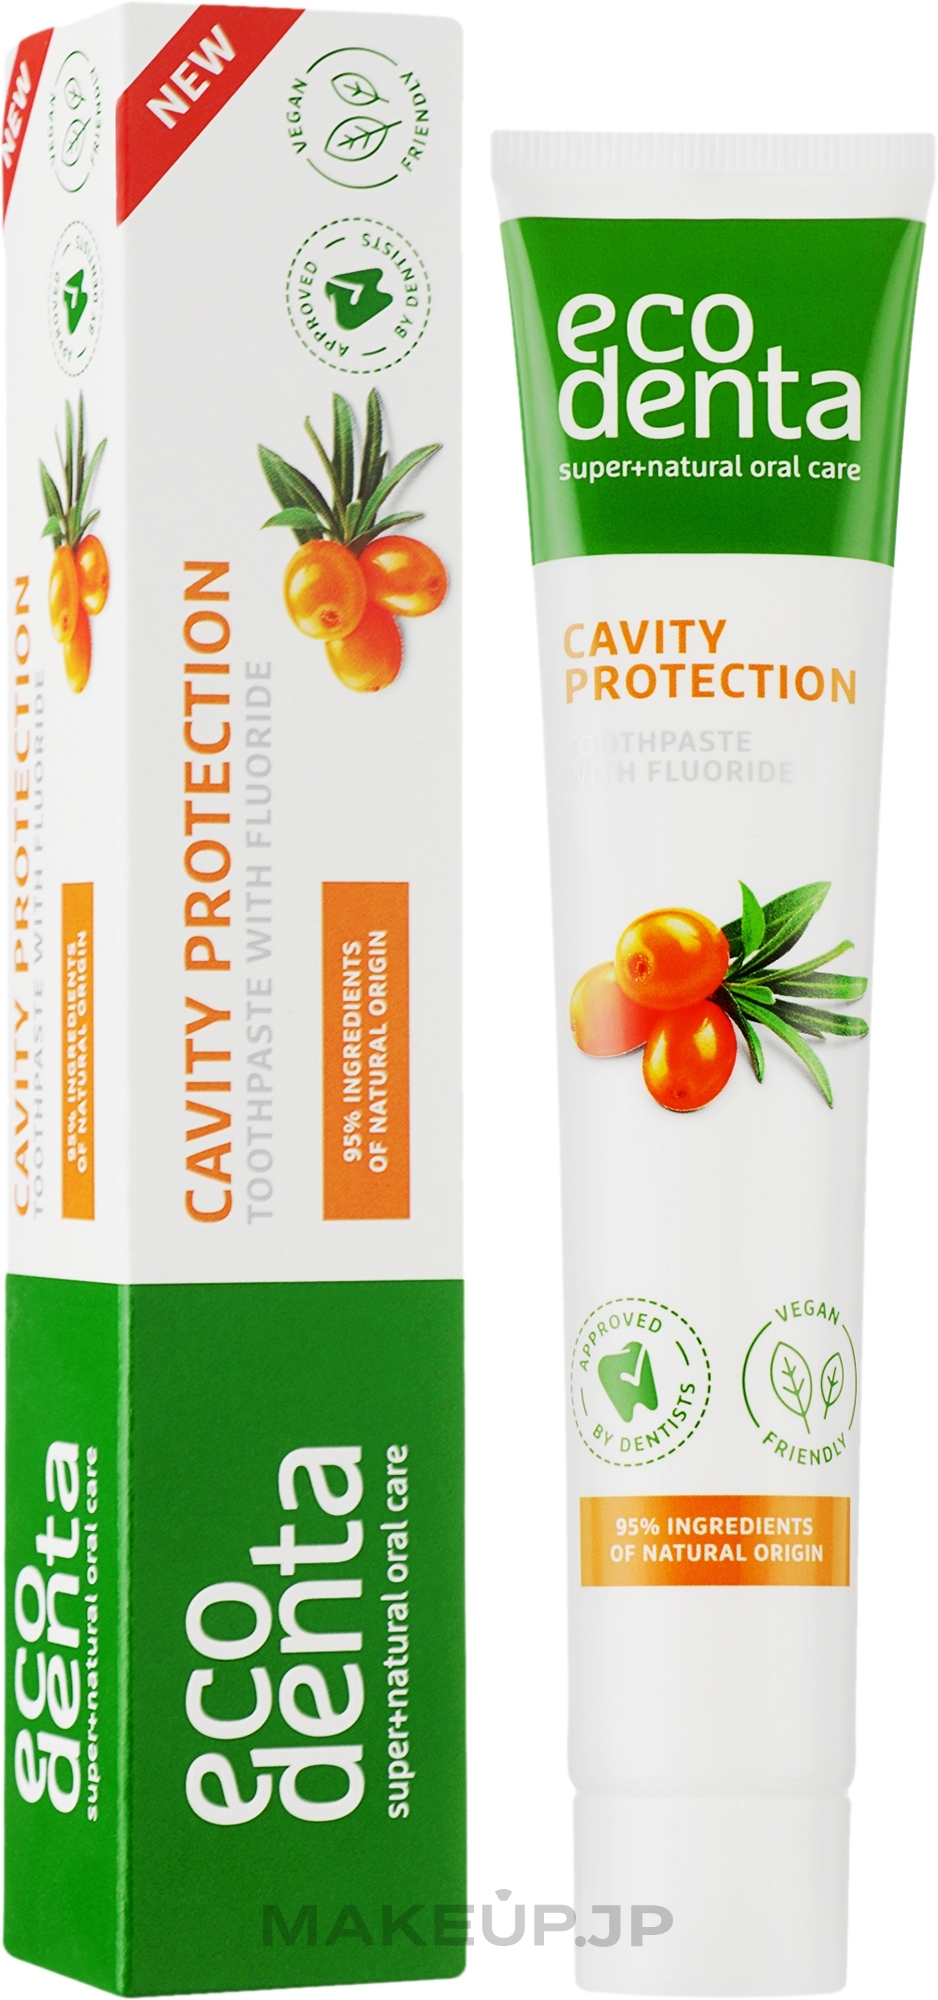 Cavity Protection Toothpaste with Sea Buckthorn Oil - Ecodenta Cavity Protection Toothpaste — photo 75 ml